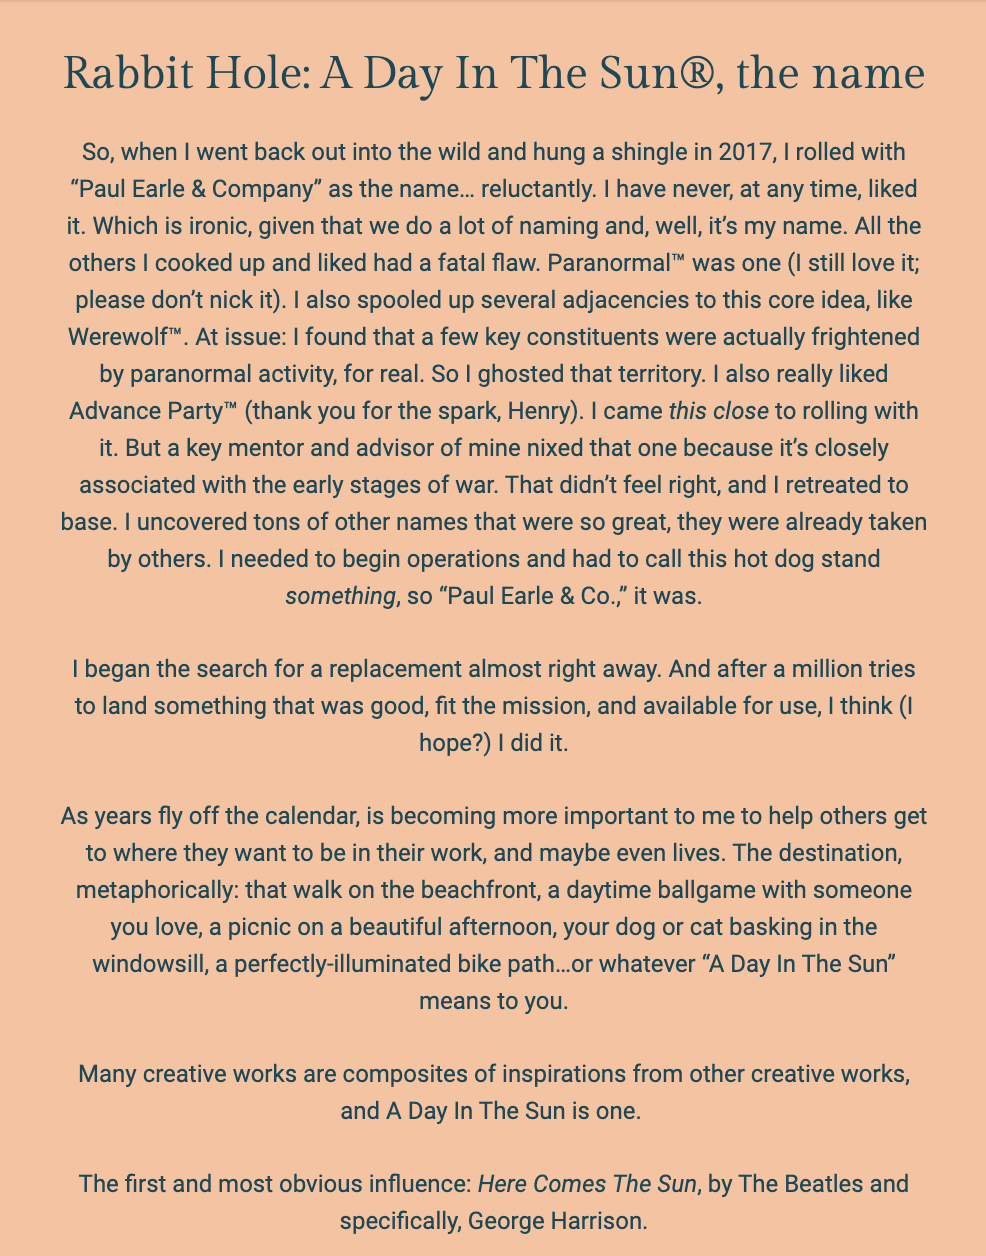 The image is a text excerpt from a document or newsletter with the title "Rabbit Hole: A Day In The Sun®, the name." The background is white with the text in a bold, dark font.

The author, Paul Earle, reflects on the origin of the name "Paul Earle & Company," which he chose in 2017 with some reluctance, noting his general disinterest in the name despite his profession involving naming. He discusses his initial preference for the name "Paranormal™" and the adjacent concept "Werewolf™," but he abandoned these due to others' genuine fears of paranormal phenomena and because a mentor advised against a name associated with war. He mentions that many great names were already taken by others, leading him to settle on "Paul Earle & Co."

Paul then explains the intention behind the name change to "A Day In The Sun®," aiming for a name that was good, fitting the mission, and available. He expresses a desire to help others reach their goals and aspirations, which he metaphorically compares to enjoyable activities such as walks on the beachfront or daytime ballgames — whatever "A Day In The Sun" might mean to an individual.

The text concludes by noting that many creative works are inspired by others, and "A Day In The Sun" is one such composite, drawing particular inspiration from The Beatles song "Here Comes The Sun," especially from George Harrison.

The text within the image reads:
"Rabbit Hole: A Day In The Sun®, the name

So, when I went back out into the wild and hung a shingle in 2017, I rolled with “Paul Earle & Company” as the name... reluctantly. I have never, at any time, liked it. Which is ironic, given that we do a lot of naming and, well, it’s my name. All the others I cooked up and liked had a fatal flaw. Paranormal™ was one (I still love it; please don’t nick it). I also spooled up several adjacencies to this core idea, like Werewolf™. At issue: I found that a few key constituents were actually frightened by paranormal activity, for real. So I ghosted that territory. I also really liked Advance Party™ (thank you for the spark, Henry). I came this close to rolling with it. But a key mentor and advisor of mine nixed that one because it’s closely associated with the early stages of war. That didn’t feel right, and I retreated to base. I uncovered tons of other names that were so great, they were already taken by others. I needed to begin operations and had to call this hot dog stand something, so “Paul Earle & Co.,” it was.

I began the search for a replacement almost right away. And after a million tries to land something that was good, fit the mission, and available for use, I think (I hope?) I did it.

As years fly off the calendar, is becoming more important to me to help others get to where they want to be in their work, and maybe even lives. The destination, metaphorically: that walk on the beachfront, a daytime ballgame with someone you love, a picnic on a beautiful afternoon, your dog or cat basking in the windowsill, a perfectly-illuminated bike path...or whatever “A Day In The Sun” means to you.

Many creative works are composites of inspirations from other creative works, and A Day In The Sun is one.

The first and most obvious influence: Here Comes The Sun, by The Beatles and specifically, George Harrison."